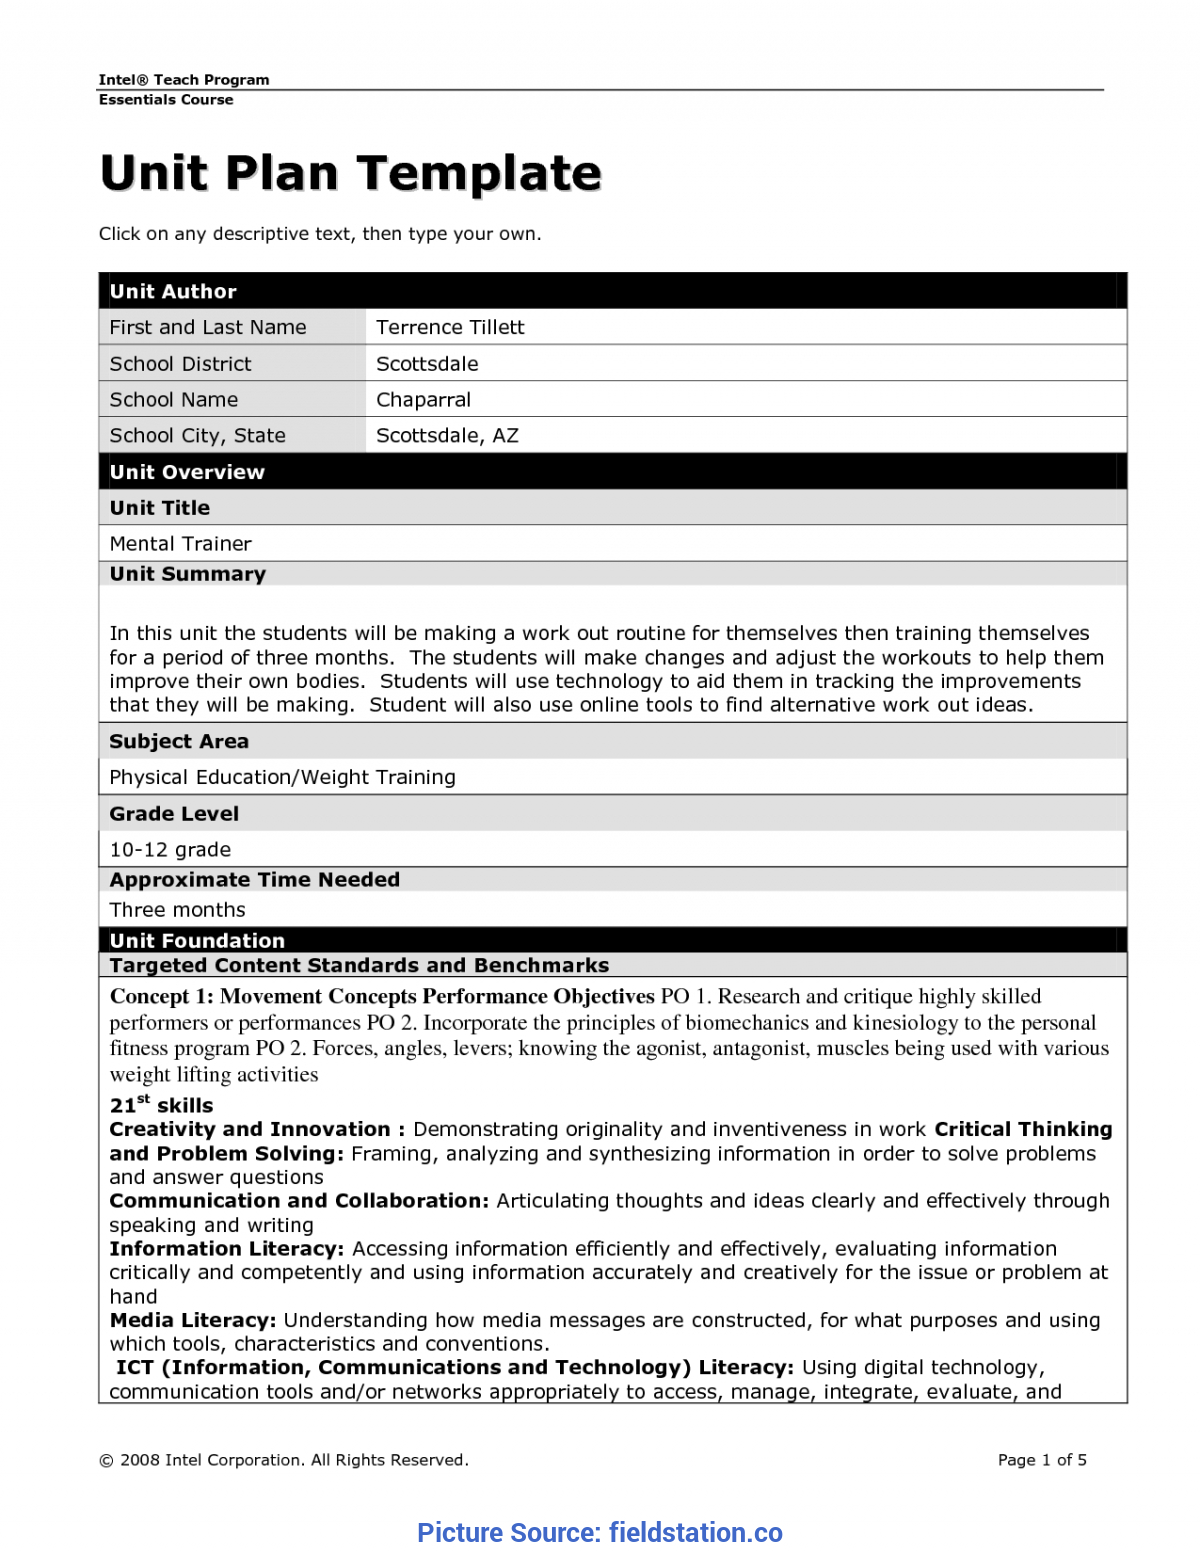 Newest Lesson Plan Template Ontario Blank Unit Lesson Plan Throughout Blank Unit Lesson Plan Template